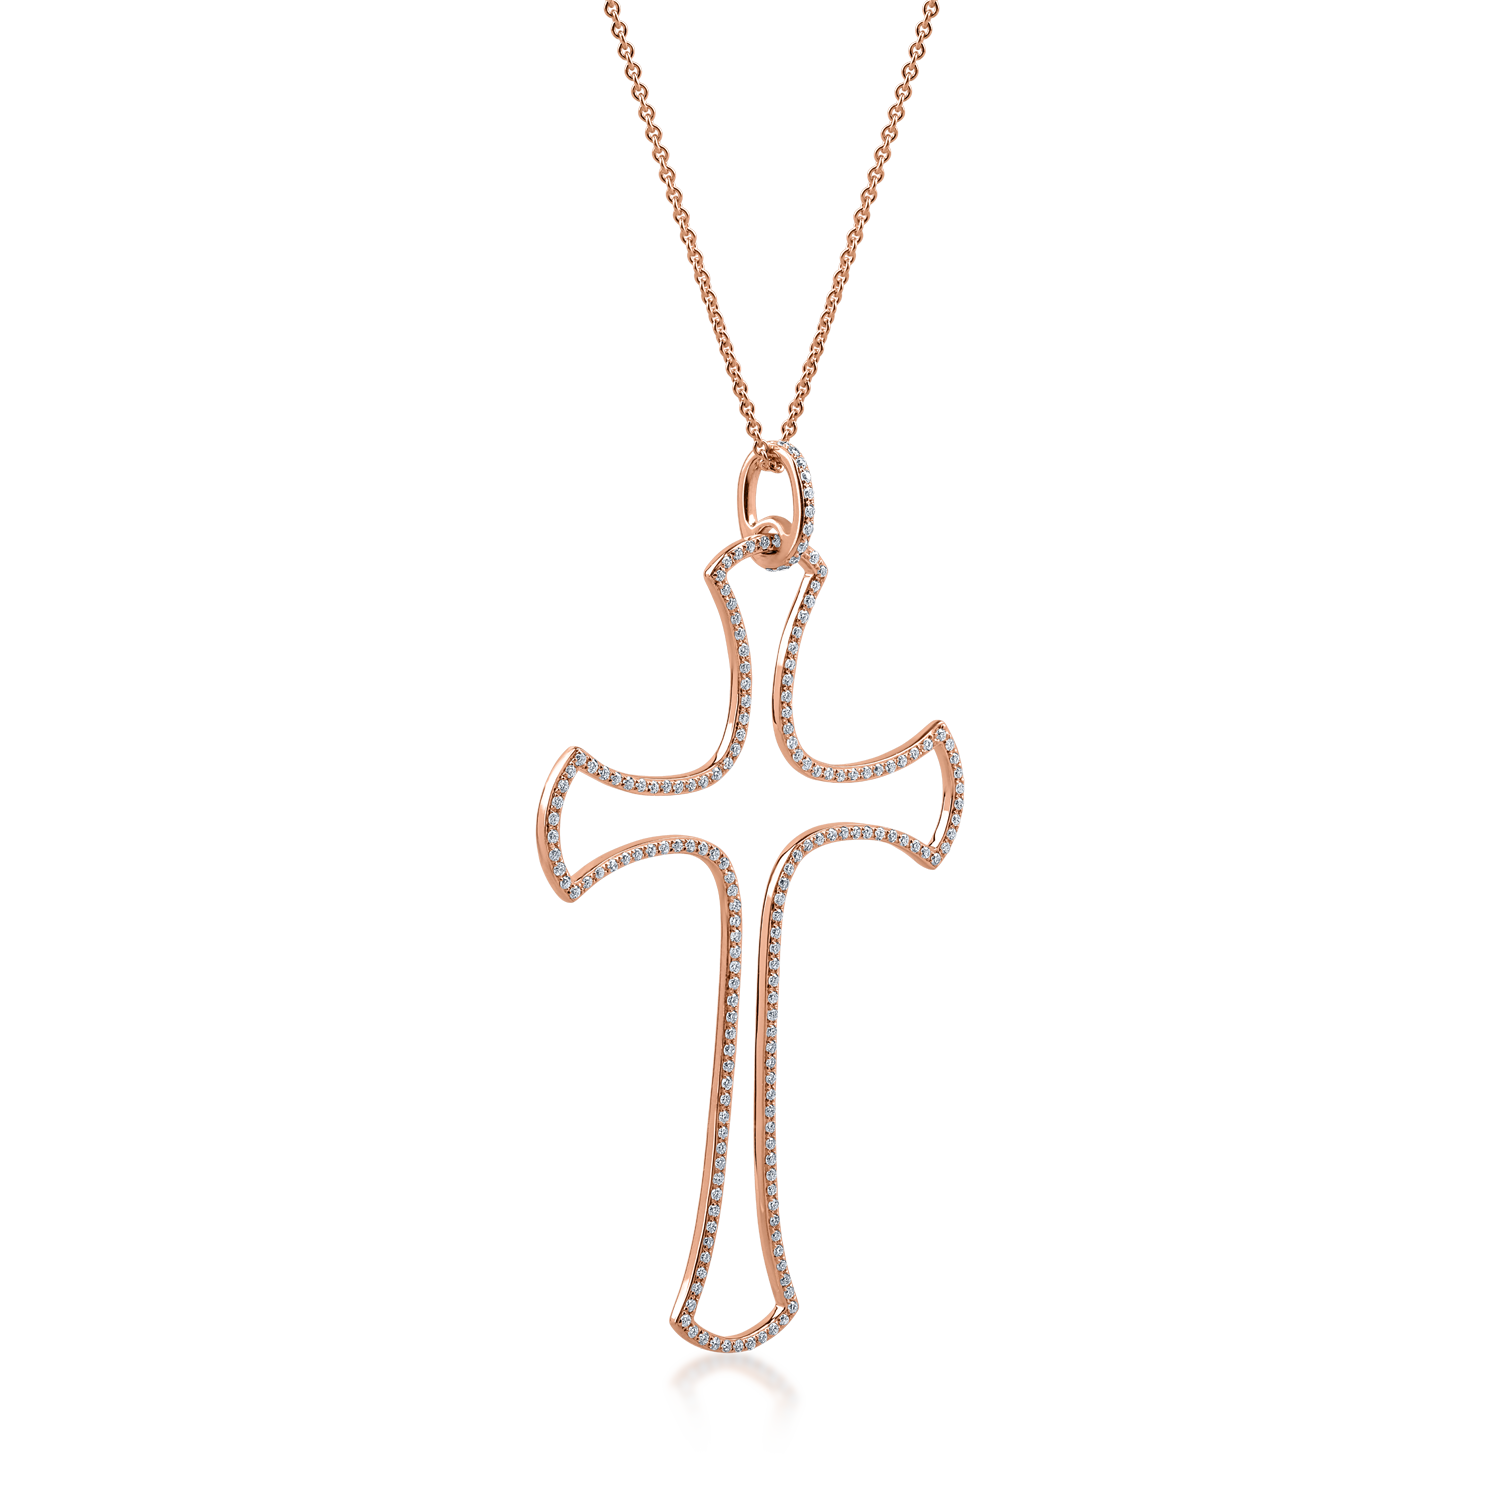 Rose gold cross pendant necklace with 0.9ct diamonds